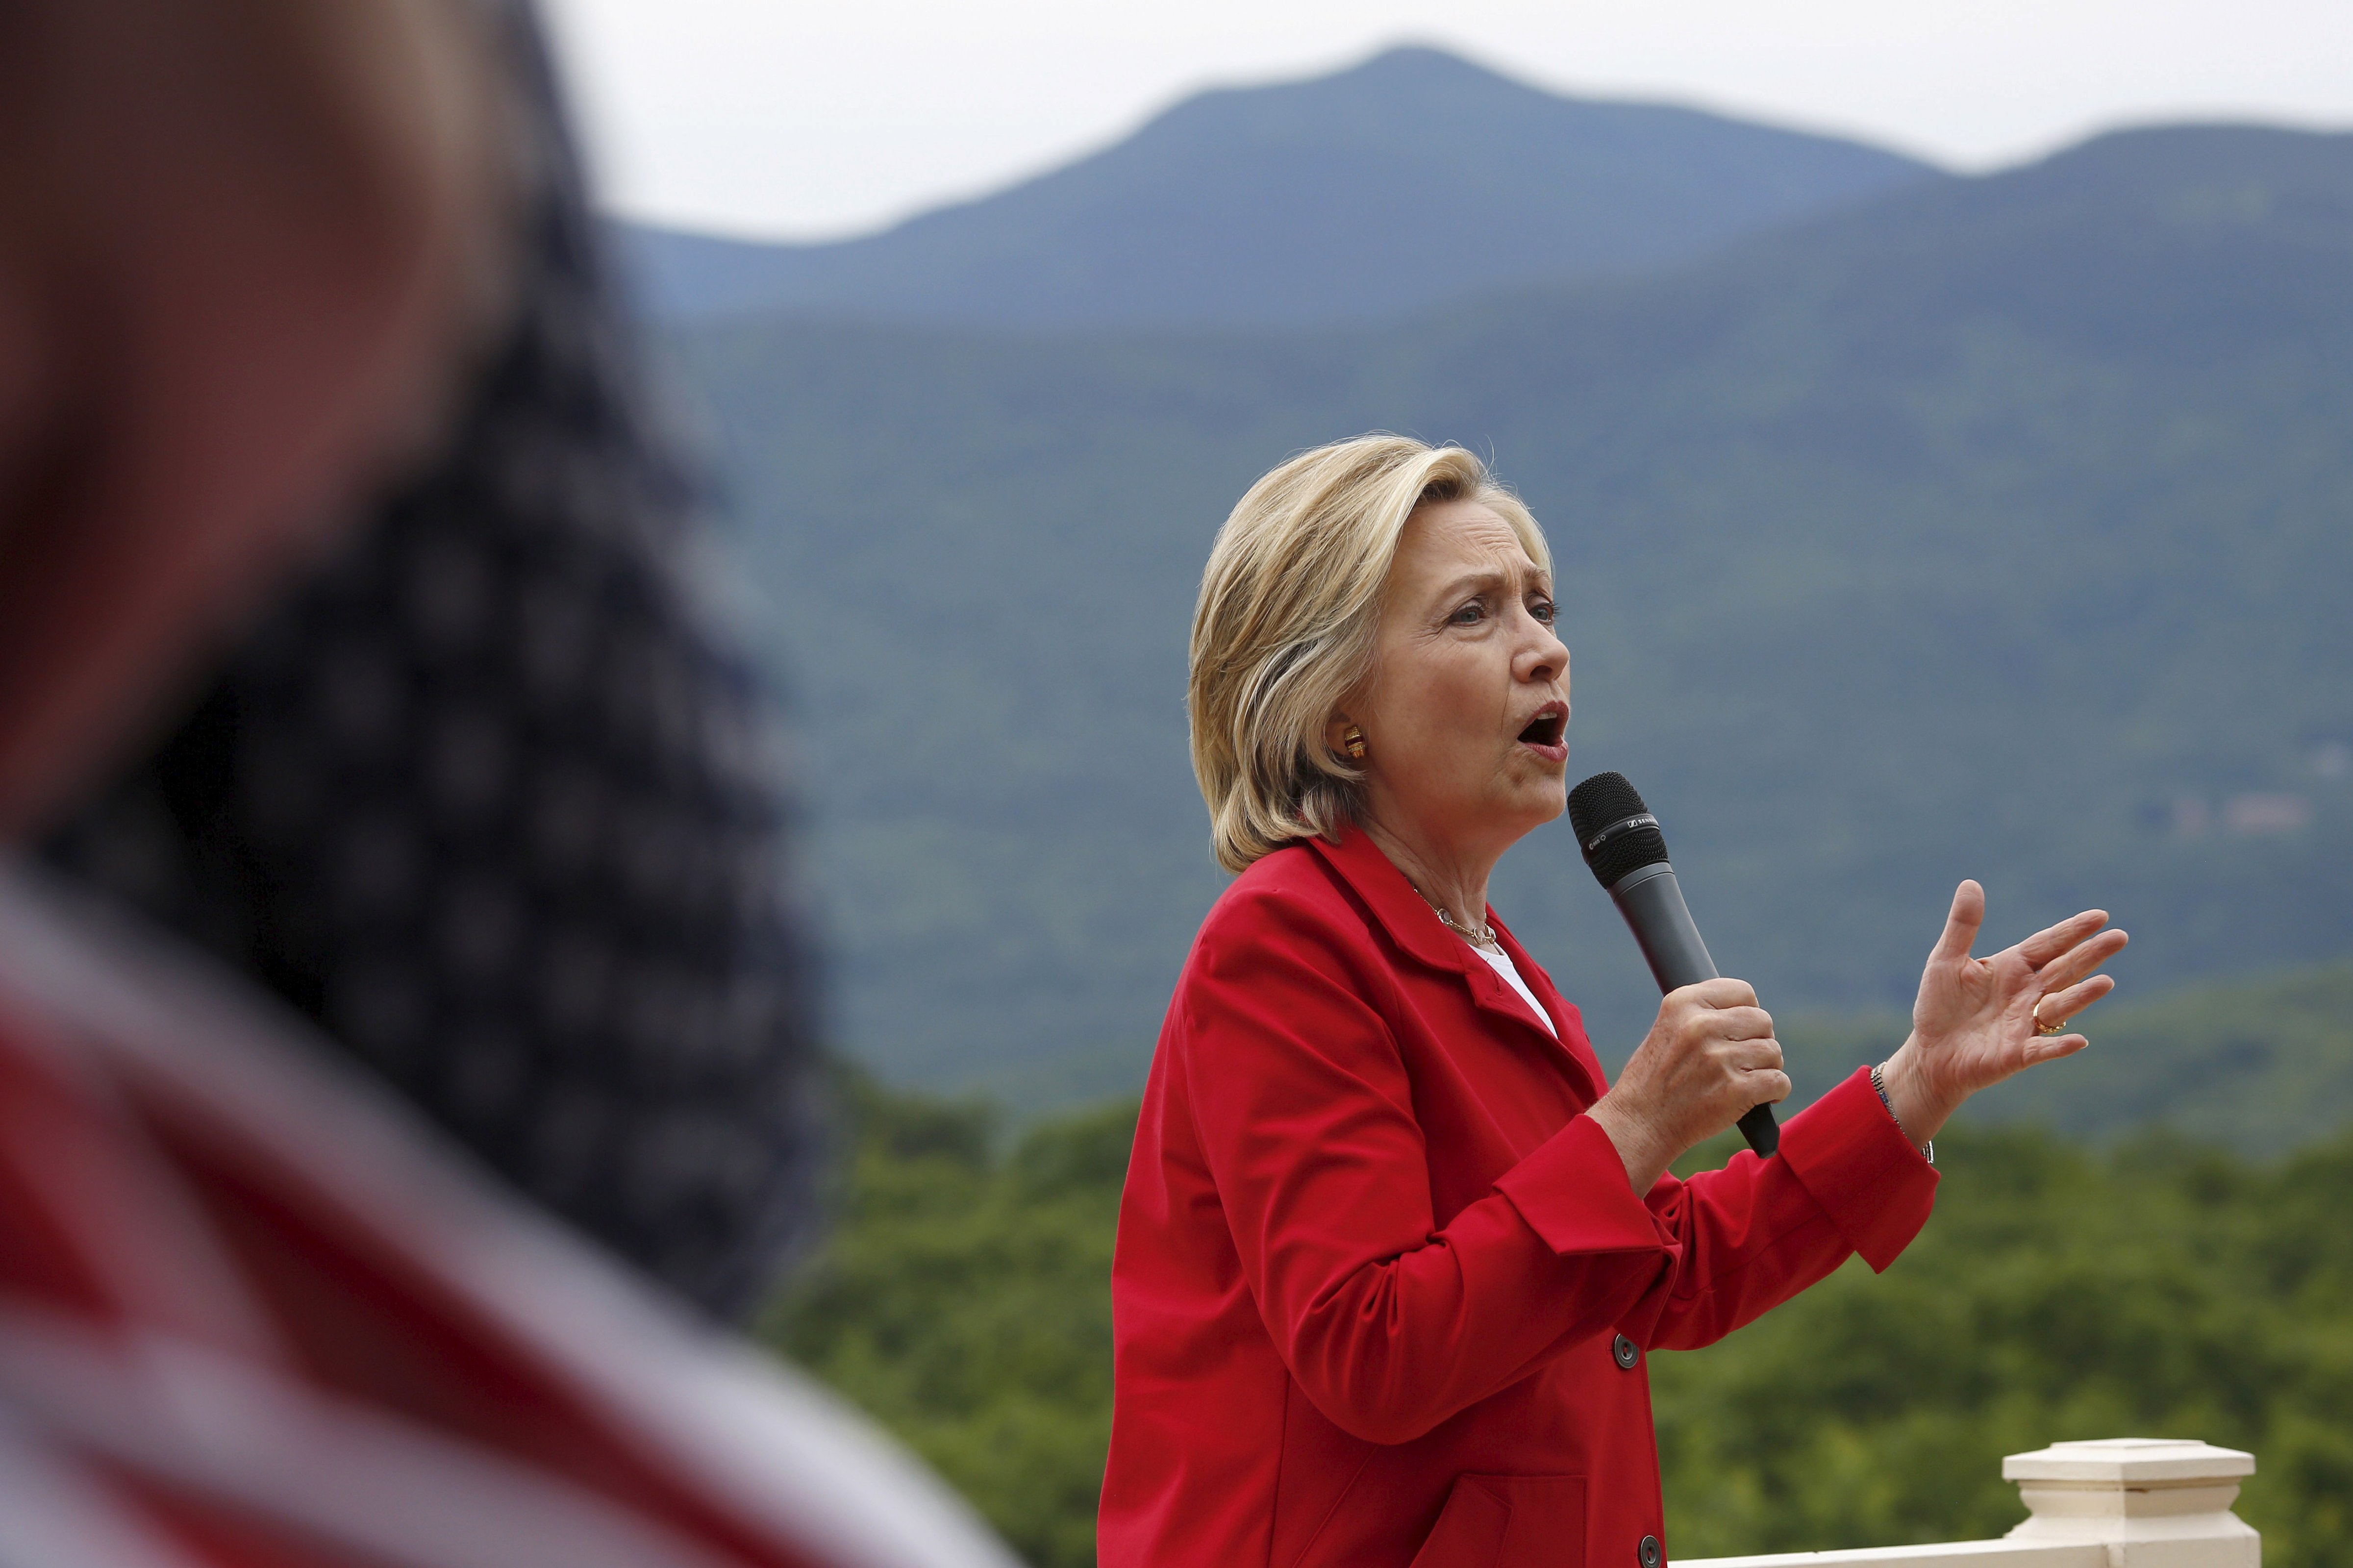 Former U.S. Secretary of State and Democratic presidential candidate Hillary Clinton speaks to supporters during a campaign event in Glen, N.H., on July 4, 2015 (Dominick Reuter&mdash;Reuters)